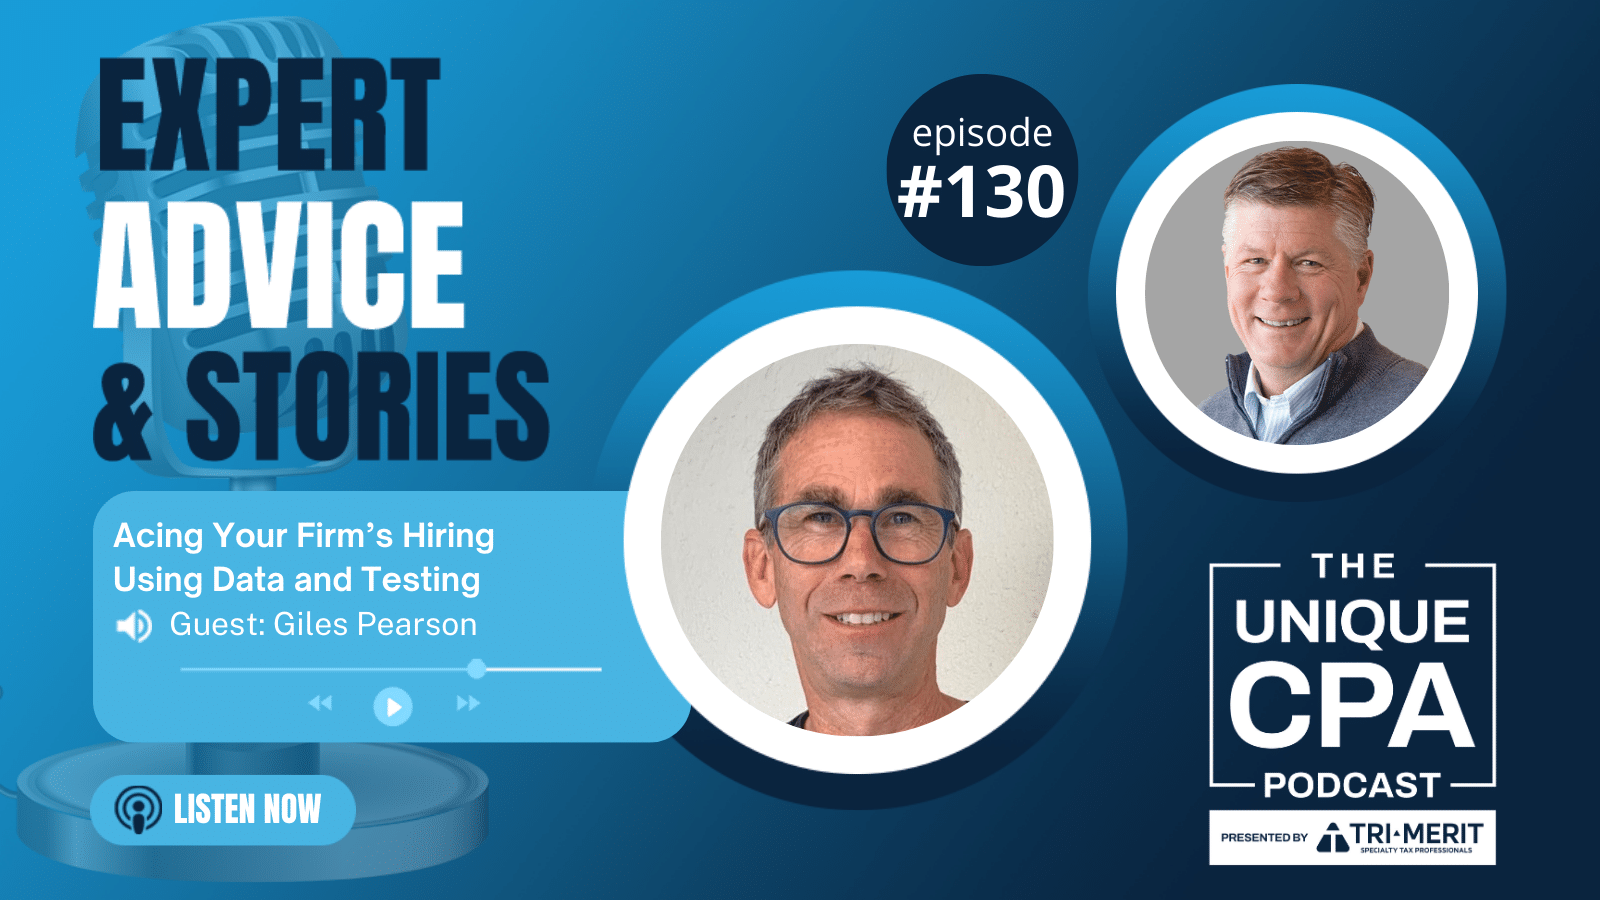 Unique Cpa Featured Image Ep 130 Giles Pearson - Acing Your Firm'S Hiring Using Data And Testing - Tri-Merit